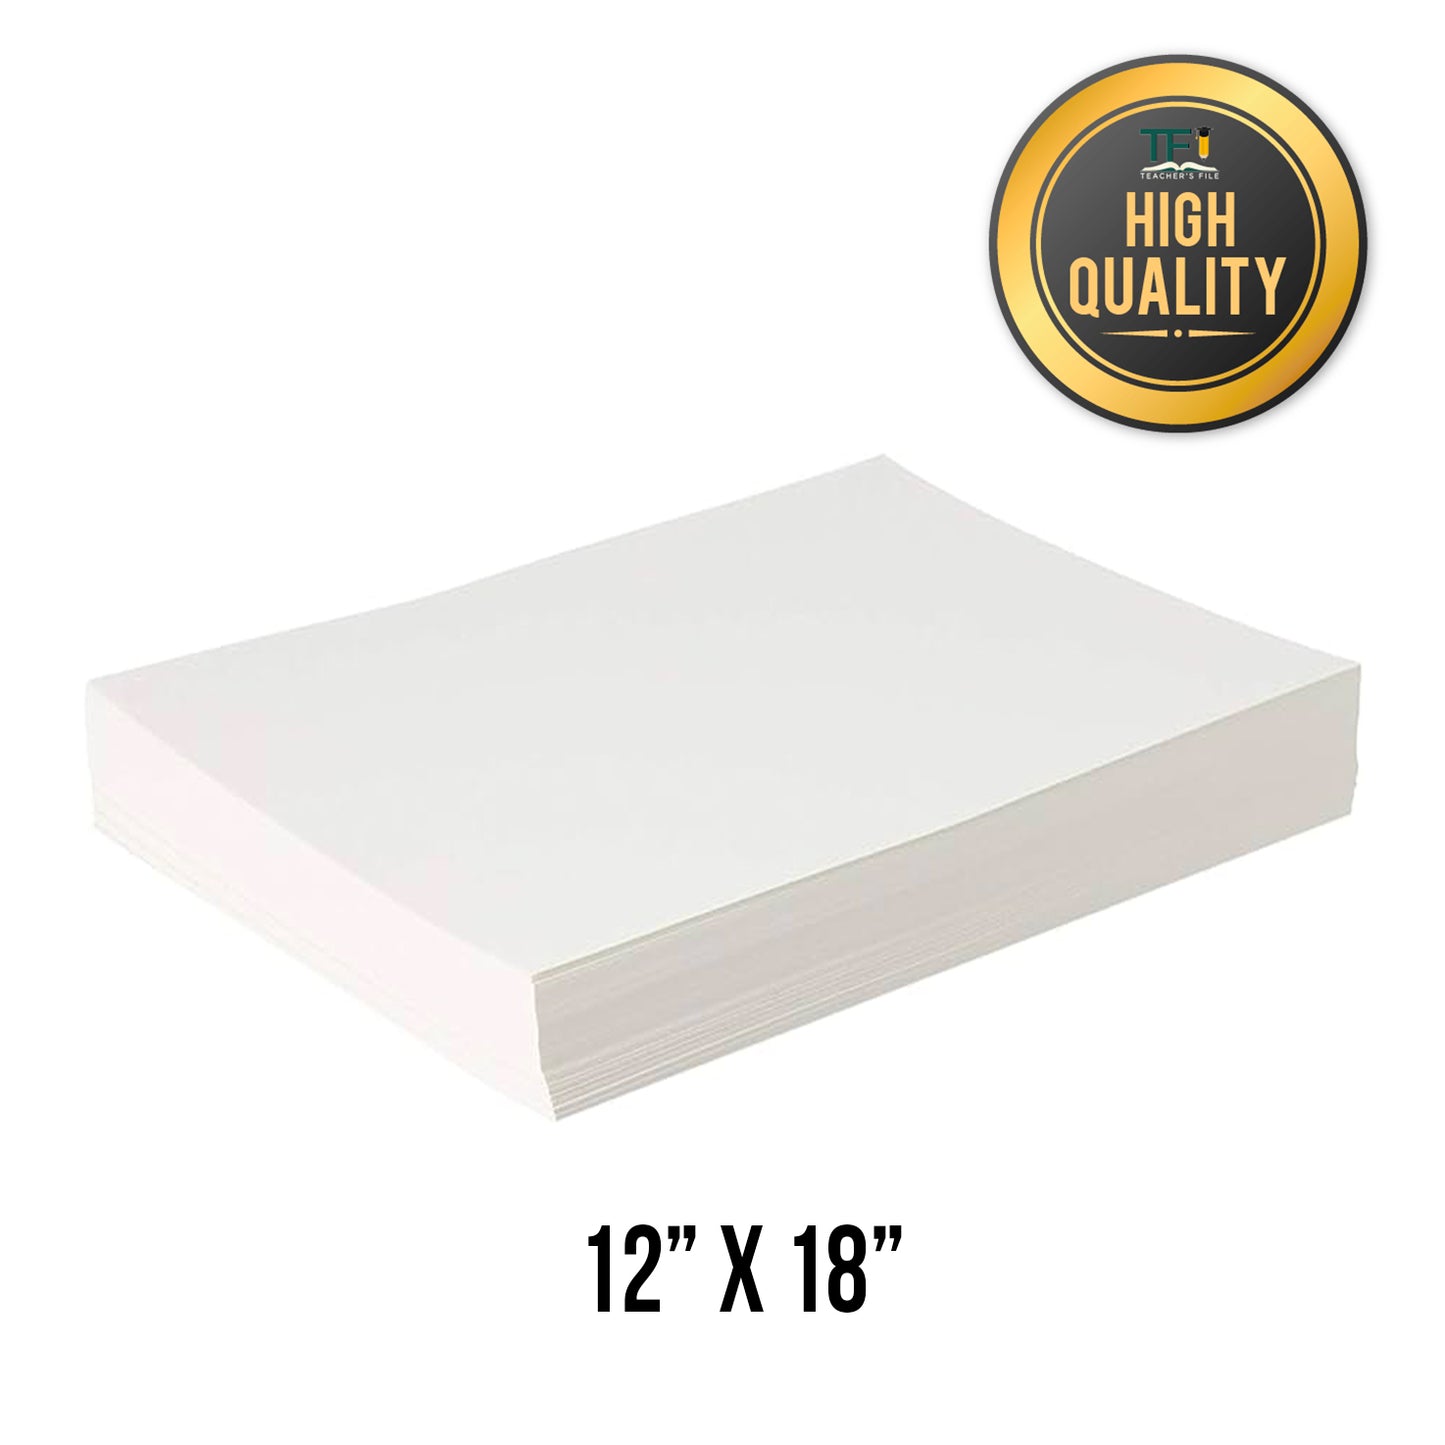 Artist Quality 300gsm Watercolour Paper - 125 Sheets